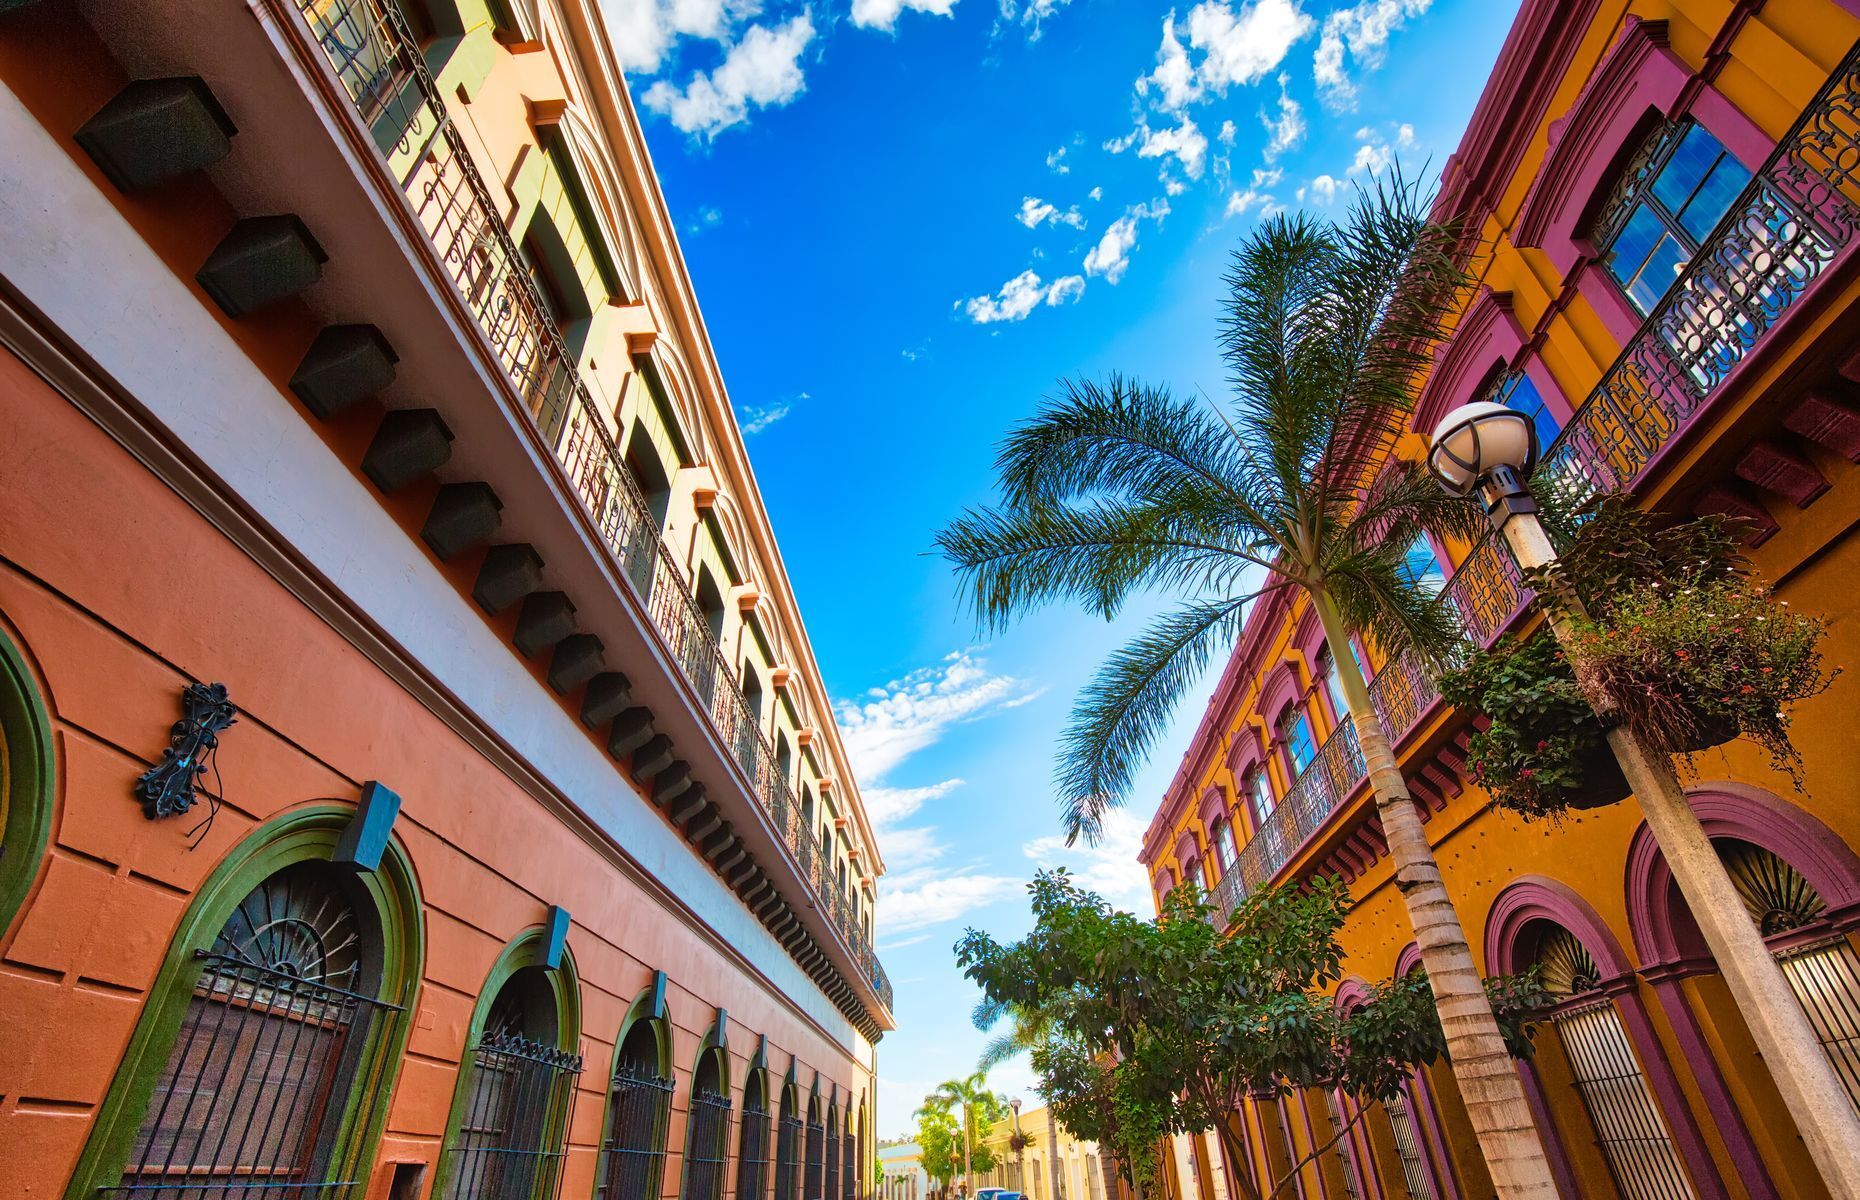 <p>With its cobbled streets and delightful colonial buildings, the Centro Histórico is a must-see when visiting <a href="https://gomazatlan.org/home/" rel="noreferrer noopener">Mazatlán</a>. For sunbathing and swimming in the Pacific Ocean, stop off at the <a href="https://www.viator.com/Mazatlan-attractions/Zona-Dorada-Golden-Zone/overview/d4151-a10249?localeSwitch=1" rel="noreferrer noopener">Zona Dorada</a> or take an oceanside stroll atop the <a href="https://mazatlanvisit.com/mazatlan-malecon.html" rel="noreferrer noopener">Malecón</a>. Culturally minded visitors shouldn’t miss the <a href="https://www.mexicoescultura.com/recinto/50960/en/museum-of-art-of-mazatlan.html" rel="noreferrer noopener">Mazatlán Art Museum</a> and its <a href="https://mazatlanvisit.com/mazatlan-cathedral.html" rel="noreferrer noopener">famous cathedral</a>. Finish your trip at the <a href="https://www.afar.com/places/mercado-pino-suarez" rel="noreferrer noopener">Mercado Pino Suárez</a> to stock up on fresh, local ingredients for a delicious dinner featuring the flavours of this flamboyant city!</p>